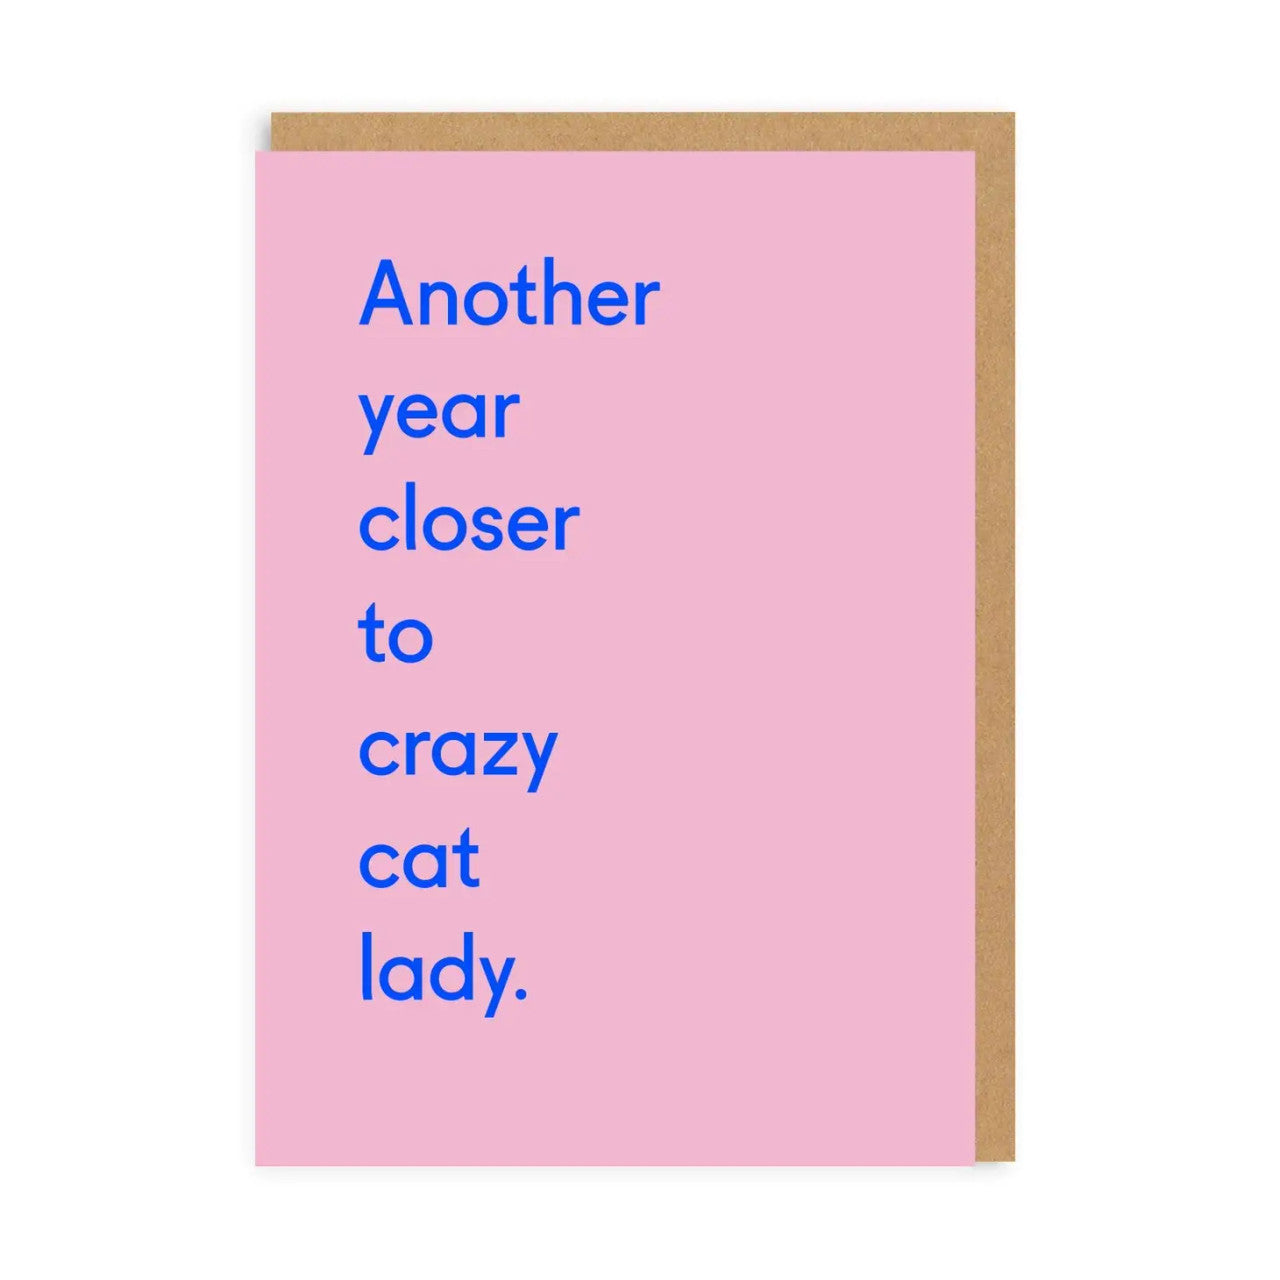 Female Birthday Card text reads "Another year closer to crazy cat lady"